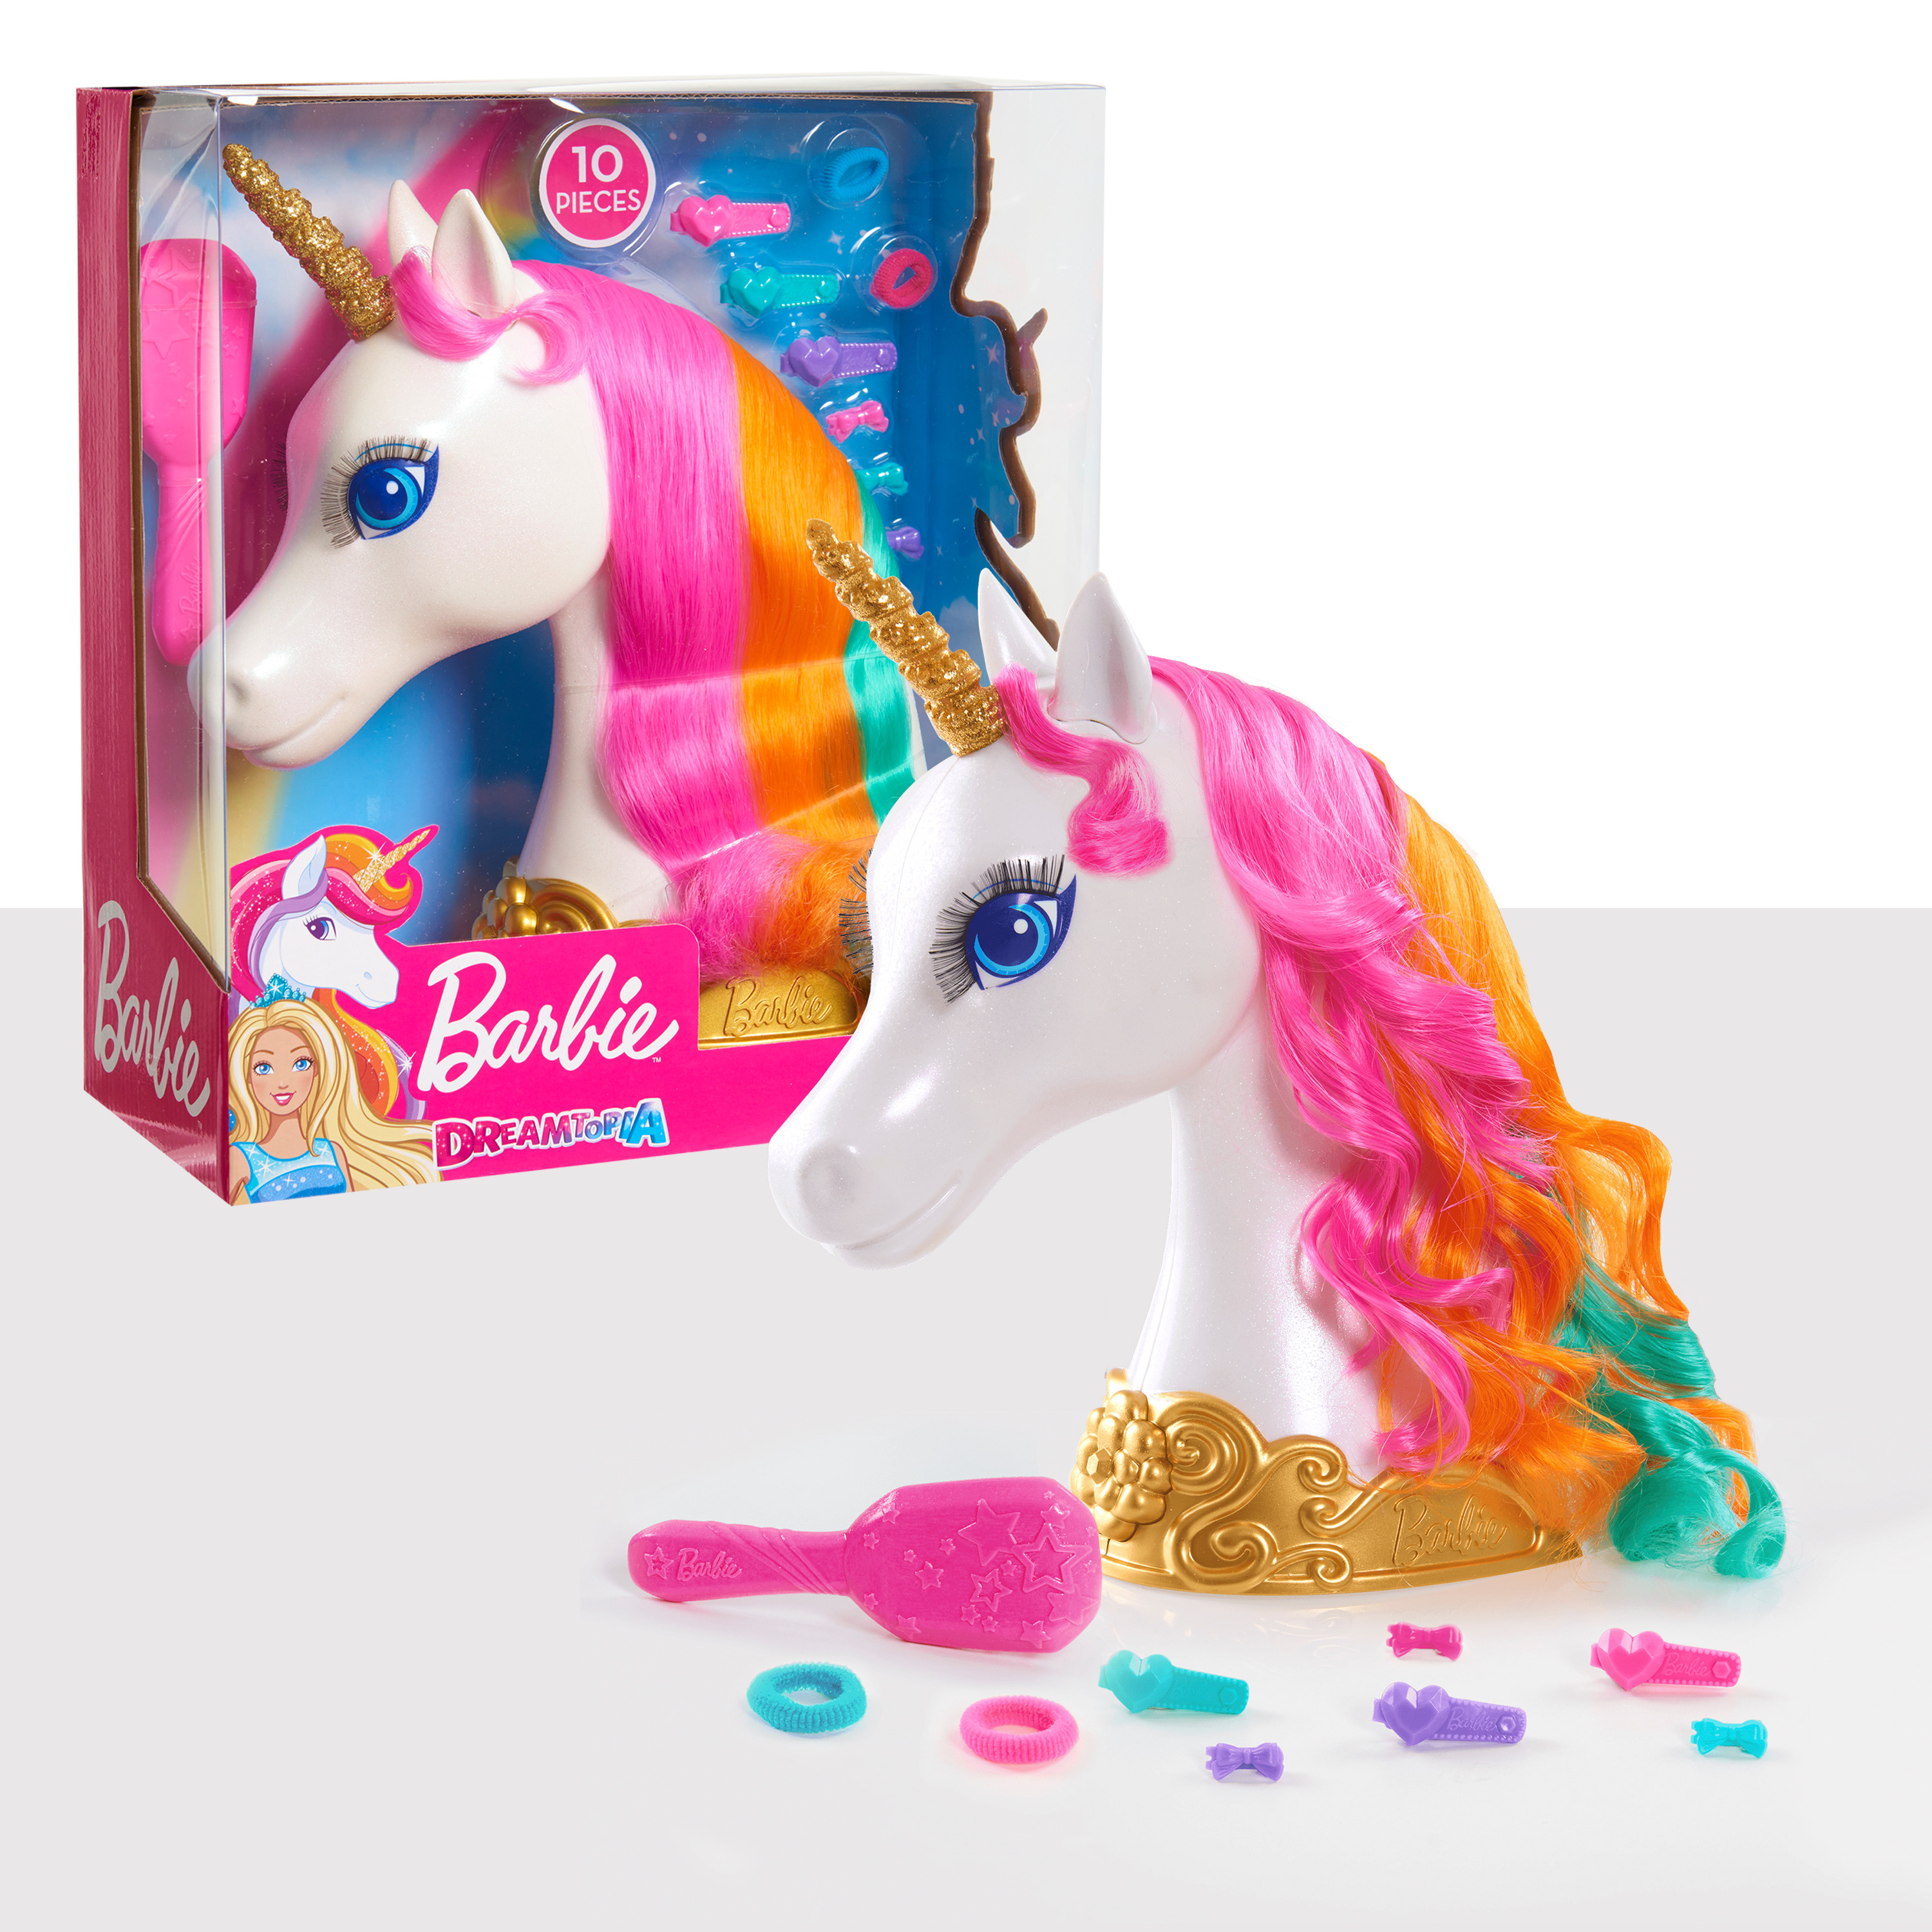 Barbie Dreamtopia Unicorn Styling Head, 10-pieces, Kids Toys for Ages 3 Up, Gifts and Presents - image 1 of 4